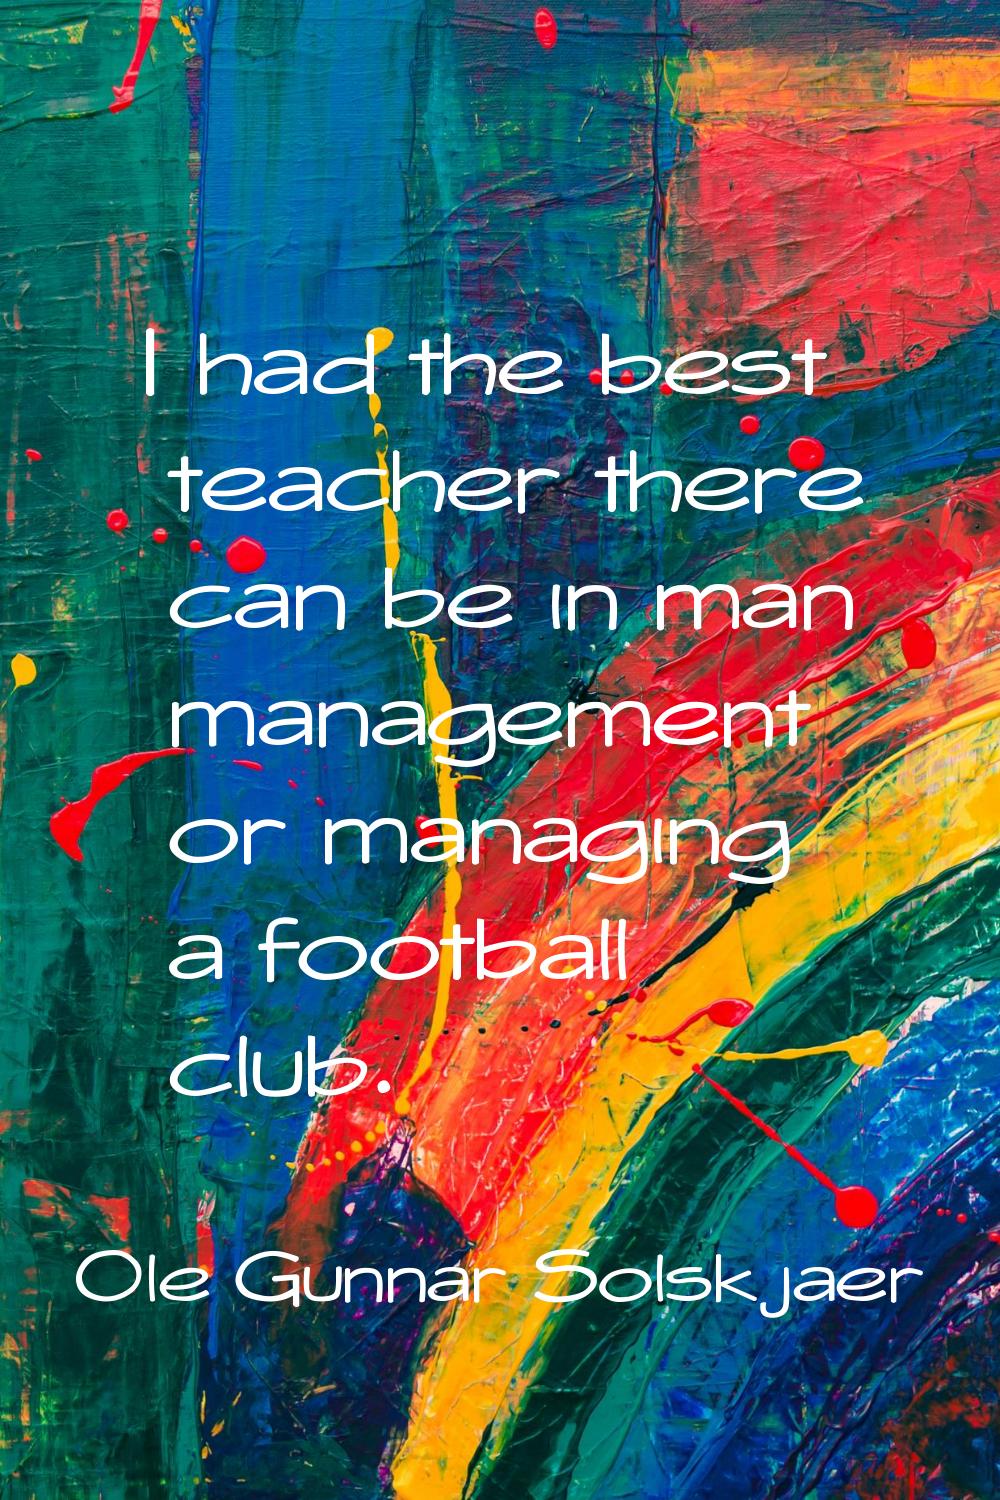 I had the best teacher there can be in man management or managing a football club.